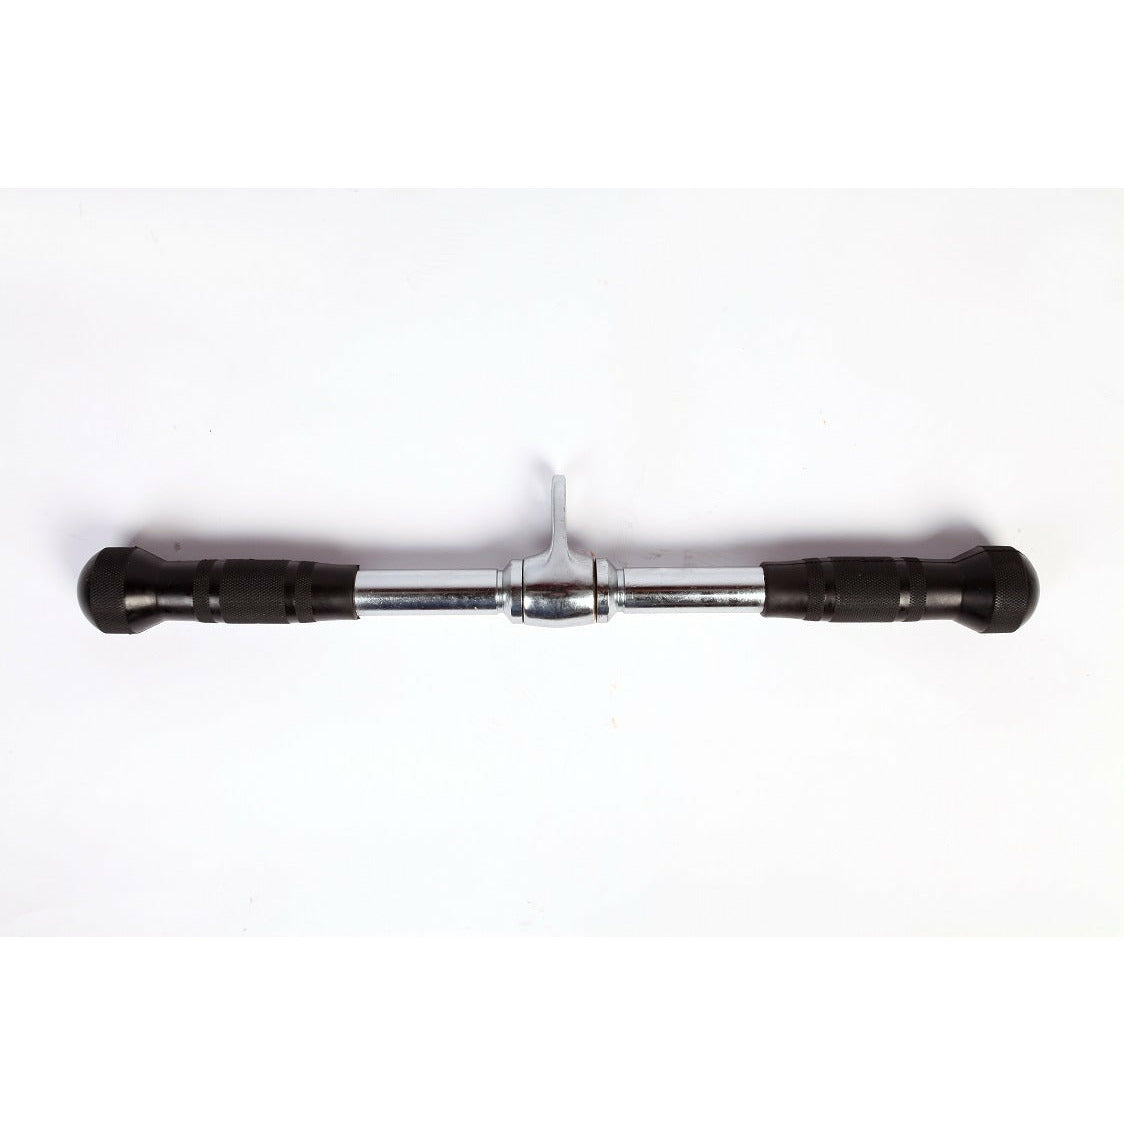 Randy & Travis Rubber Coated Solid Straight Bar Attachment